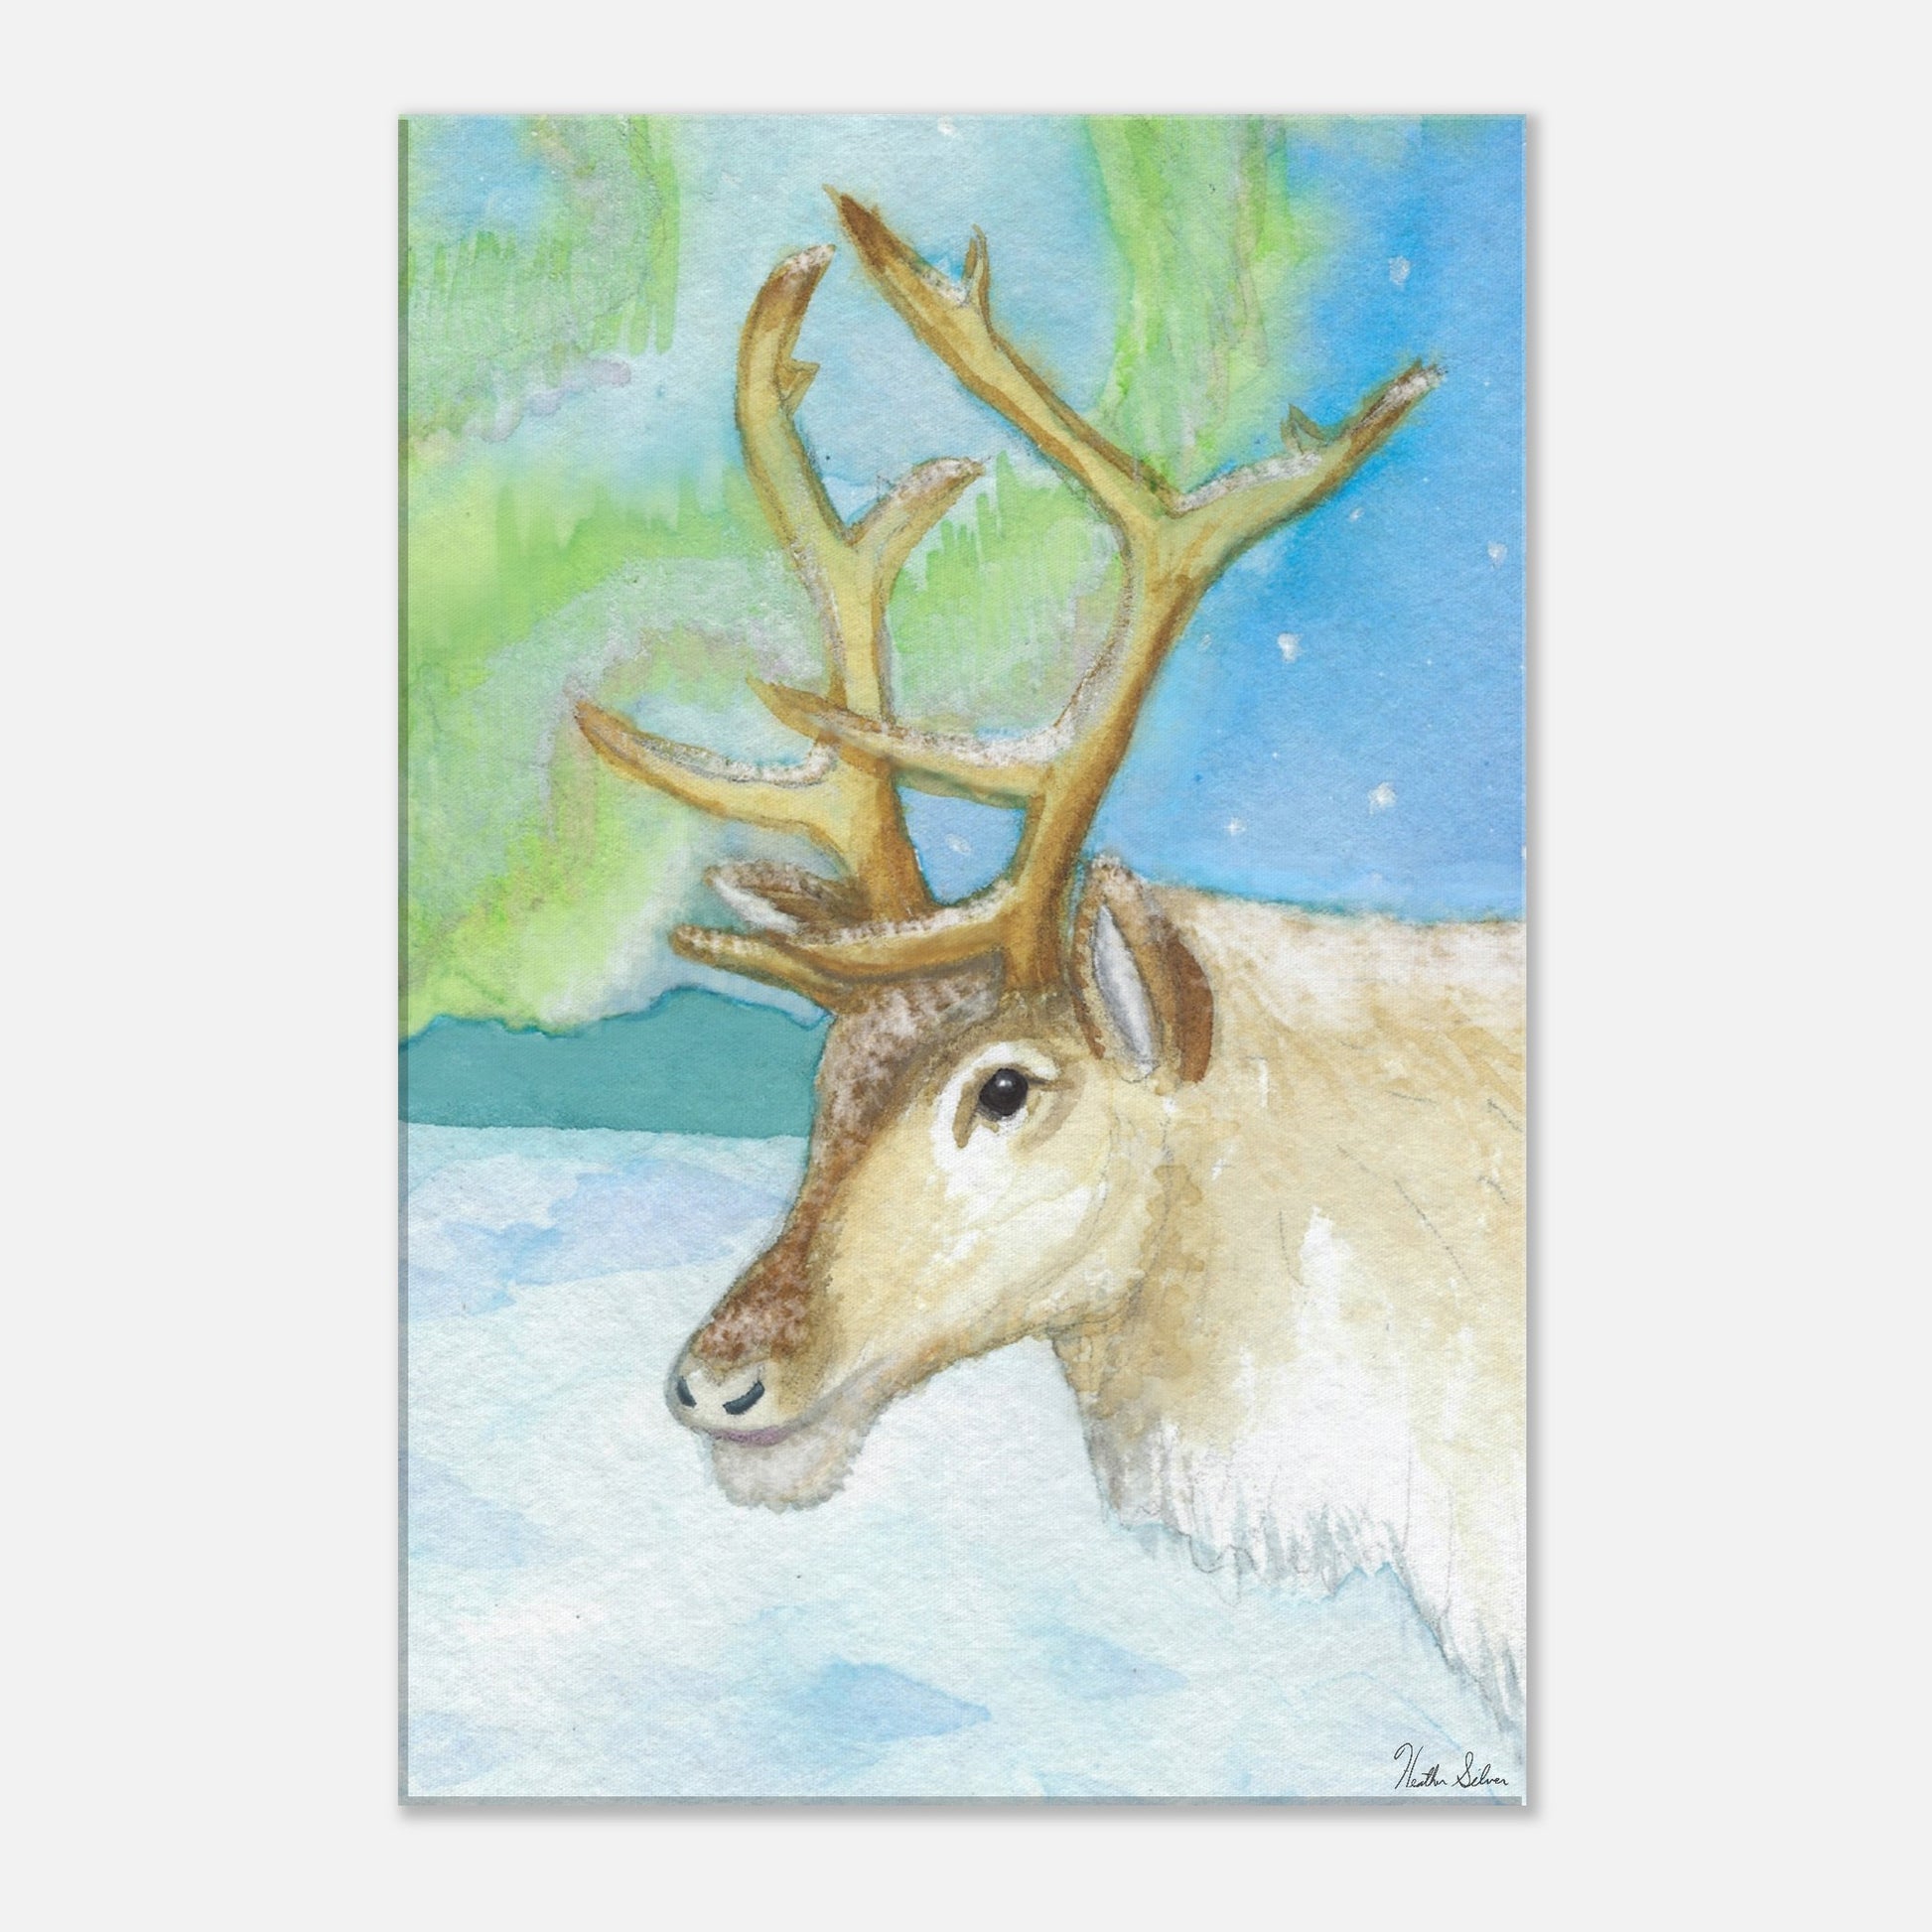 16 by 24 inch slim canvas print of Heather Silver's watercolor painting, northern lights reindeer.